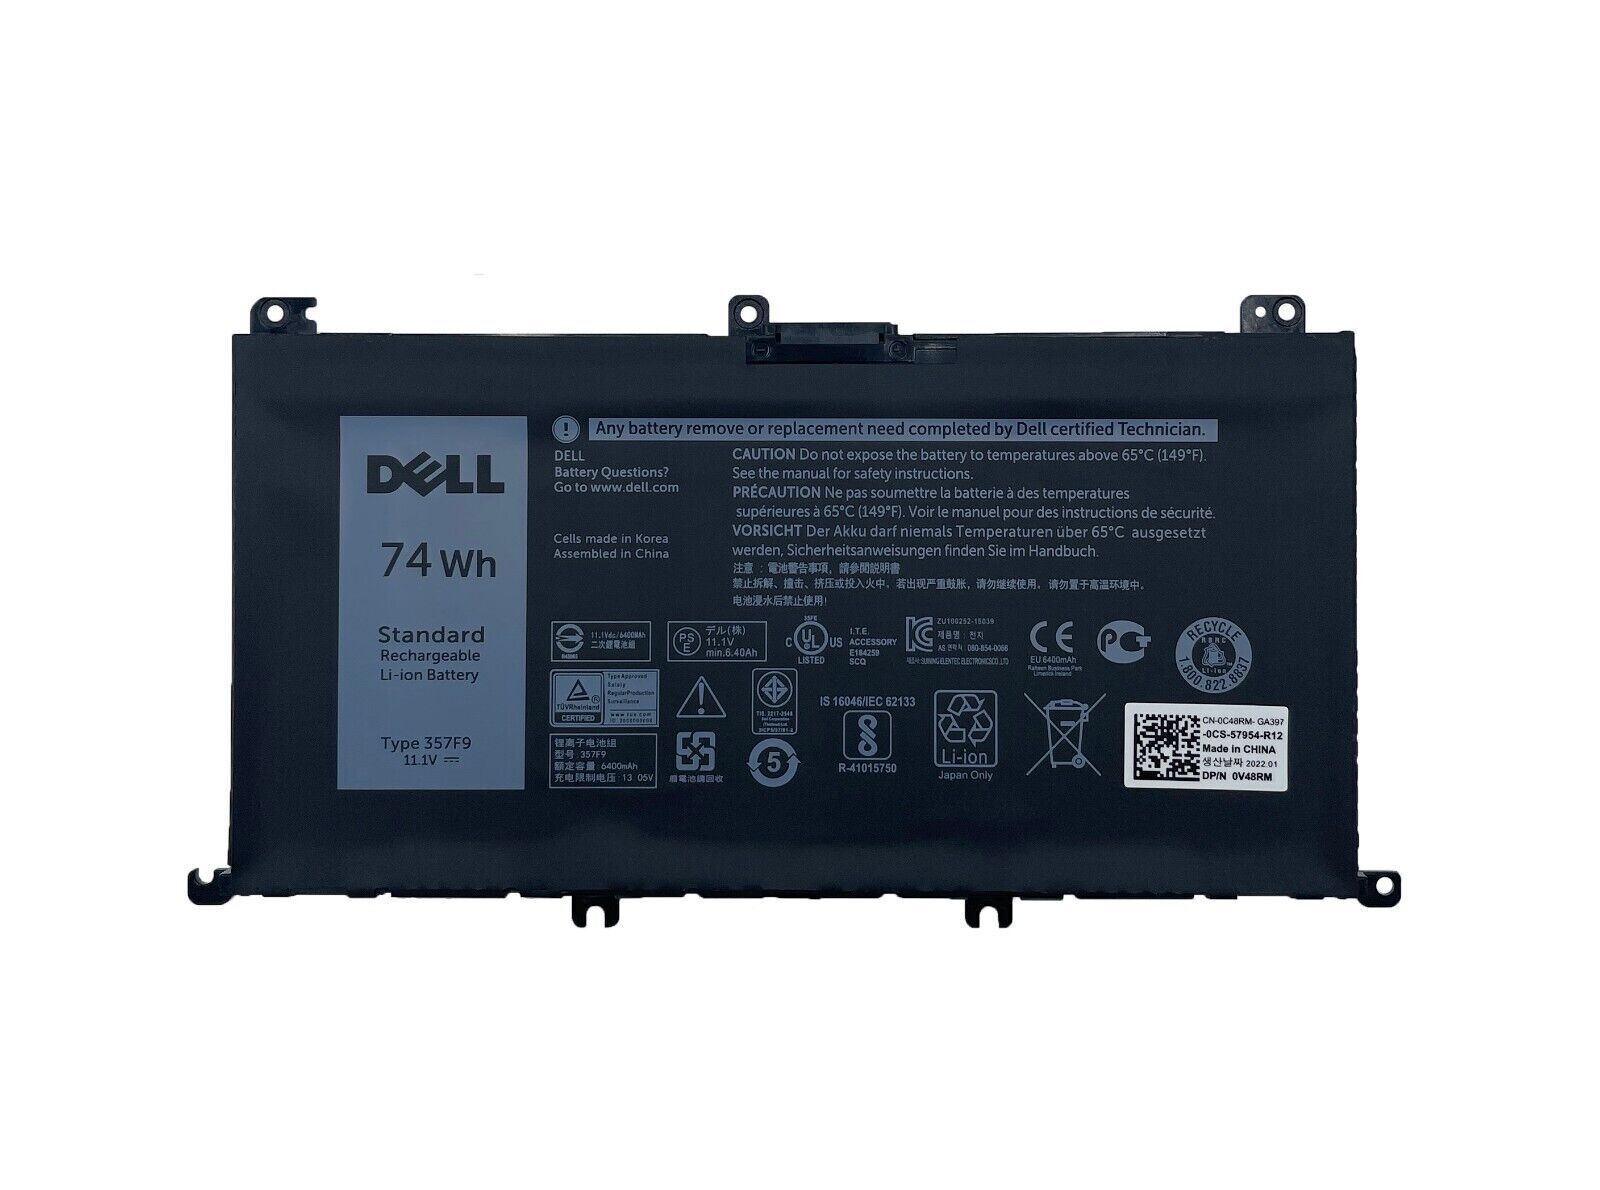 NEW OEM 74Wh 357F9 Battery For Dell Inspiron 15 7000 5576 7566 7559 71JF4 071JF4